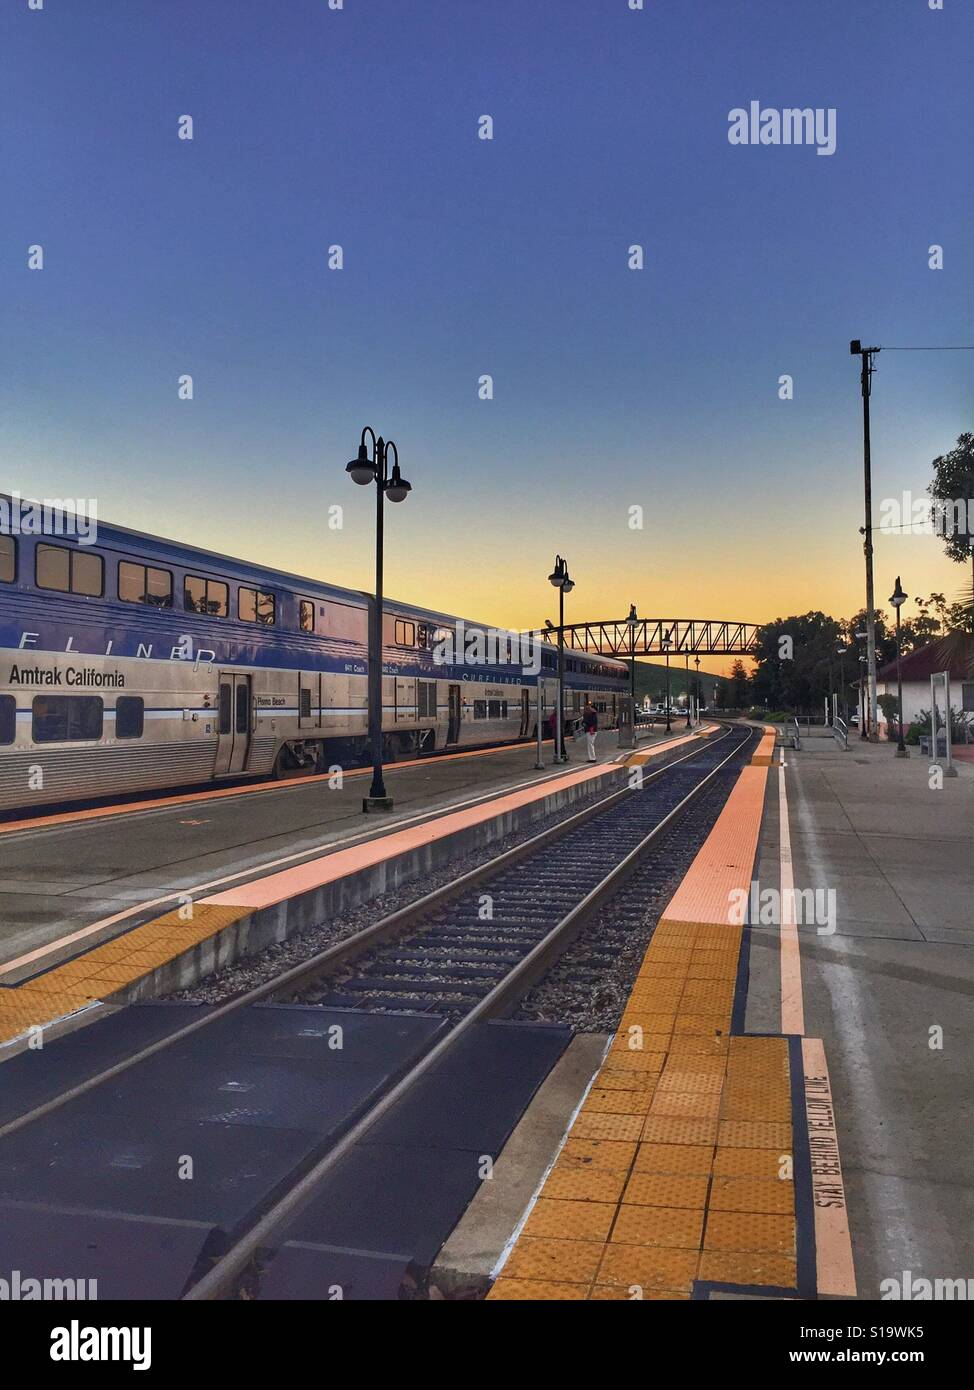 Train pulling away from train station in early morning from the Amtrak train station in San Luis Obispo, California Stock Photo